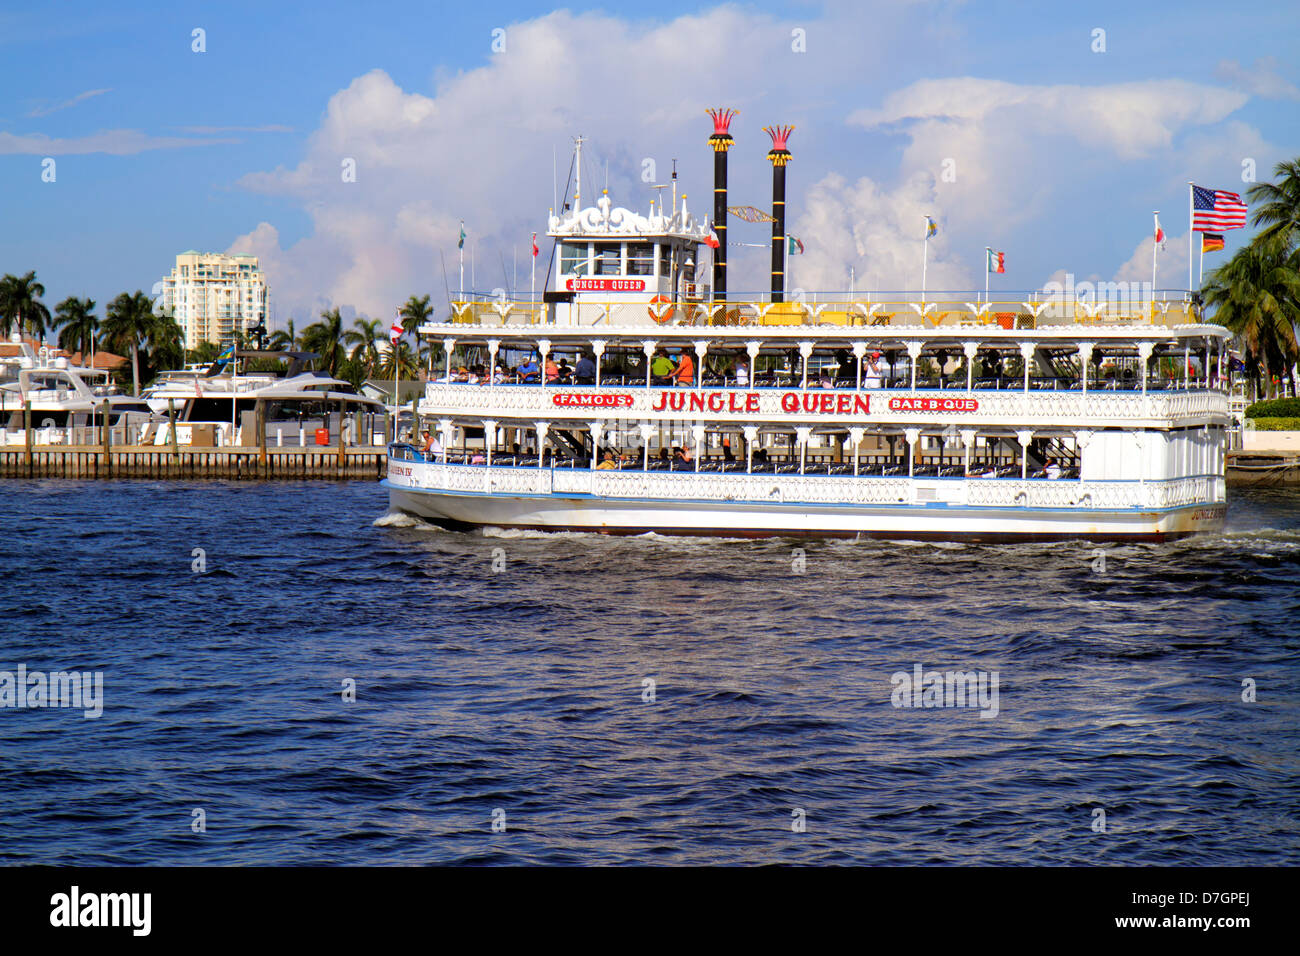 Ft. Fort Lauderdale Florida,Intracoastal Jungle Queen,replica riverboat,boat,water,FL120929159 Stock Photo